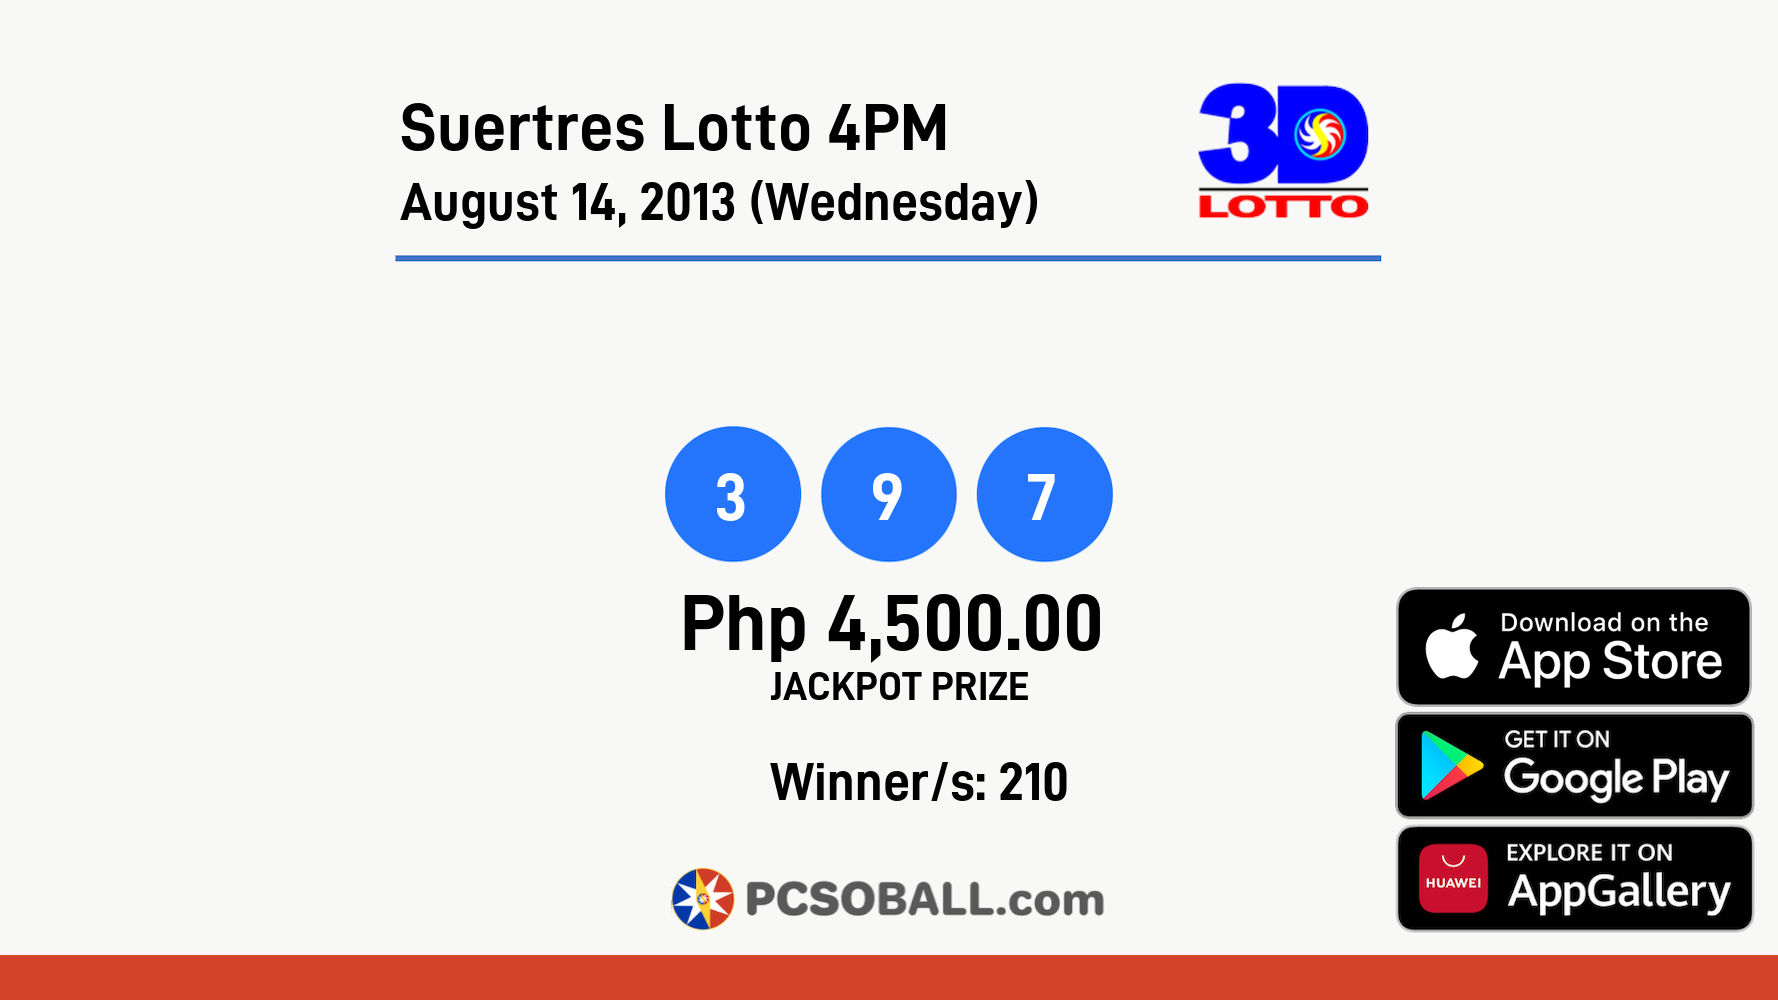 Suertres Lotto 4PM August 14, 2013 (Wednesday) Result